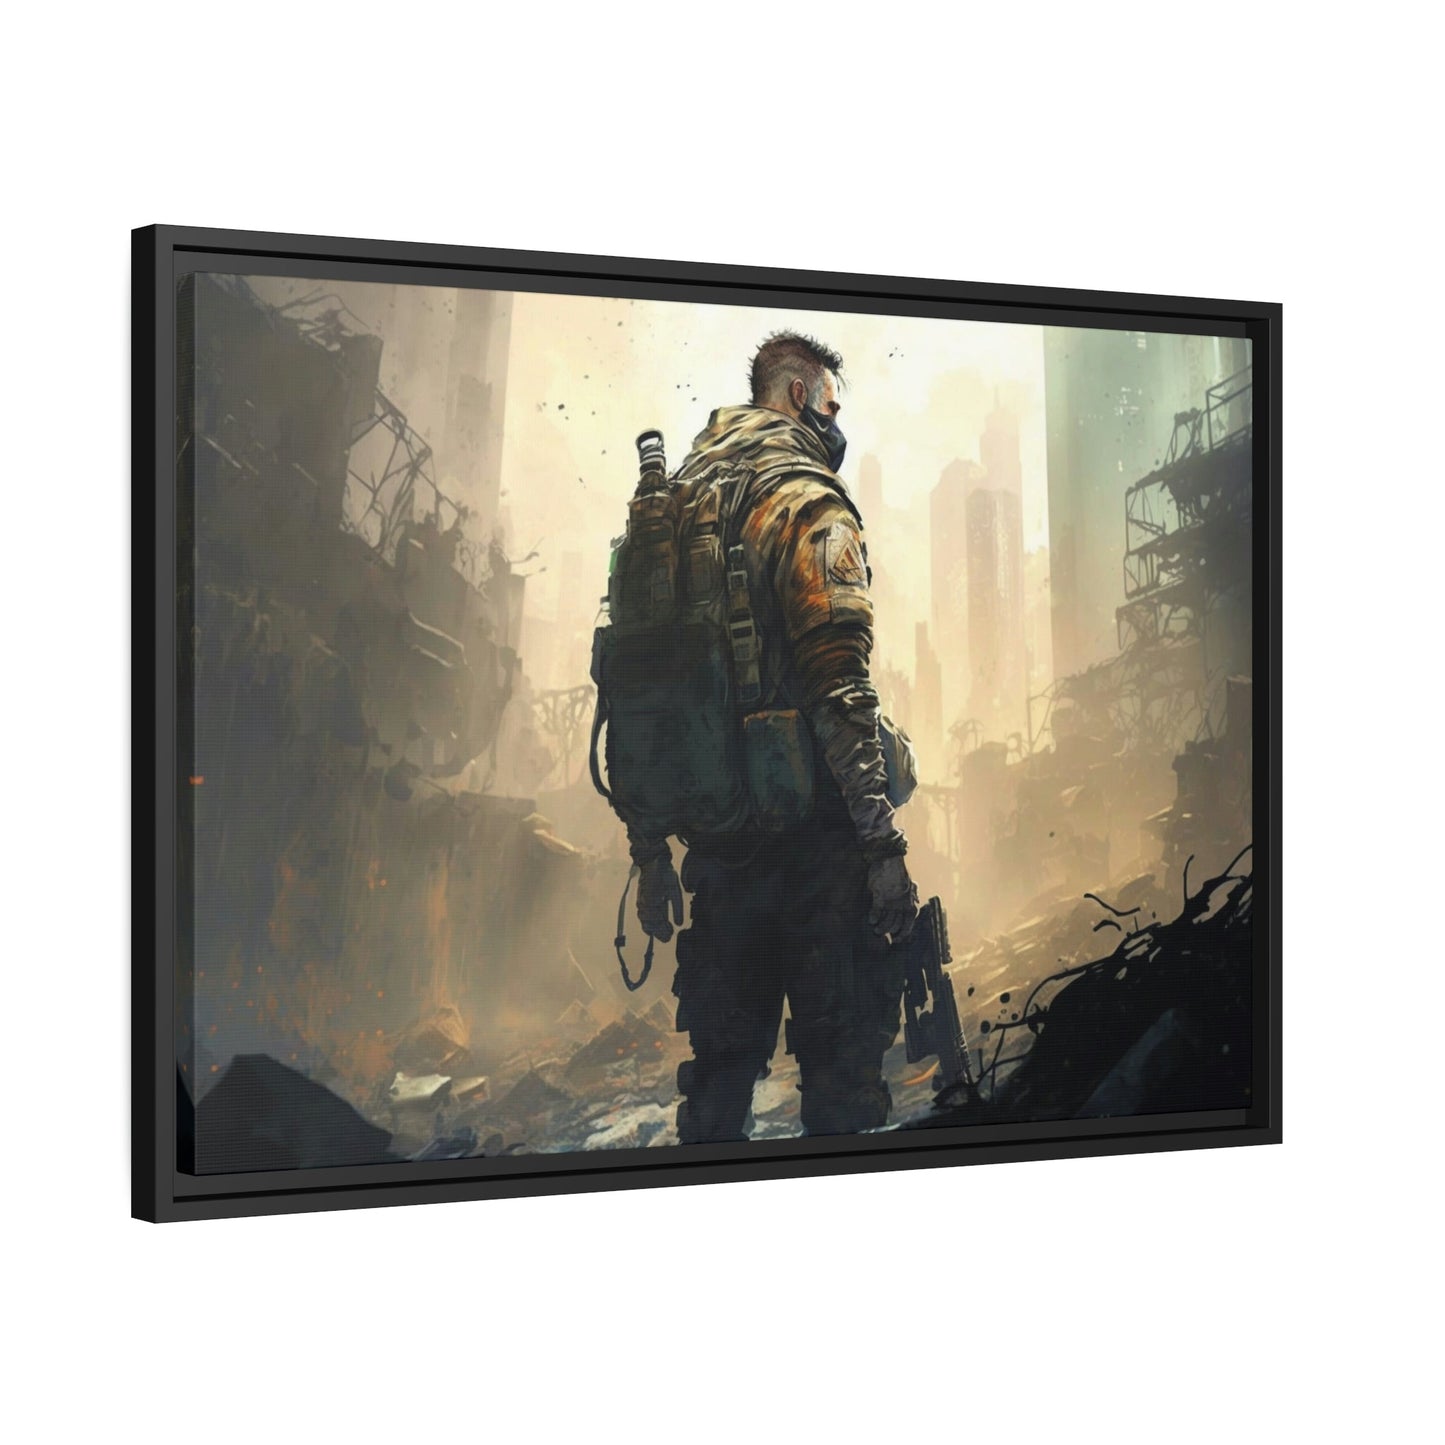 Warzone Heroes: Natural Canvas and Print on Canvas Call of Duty Art